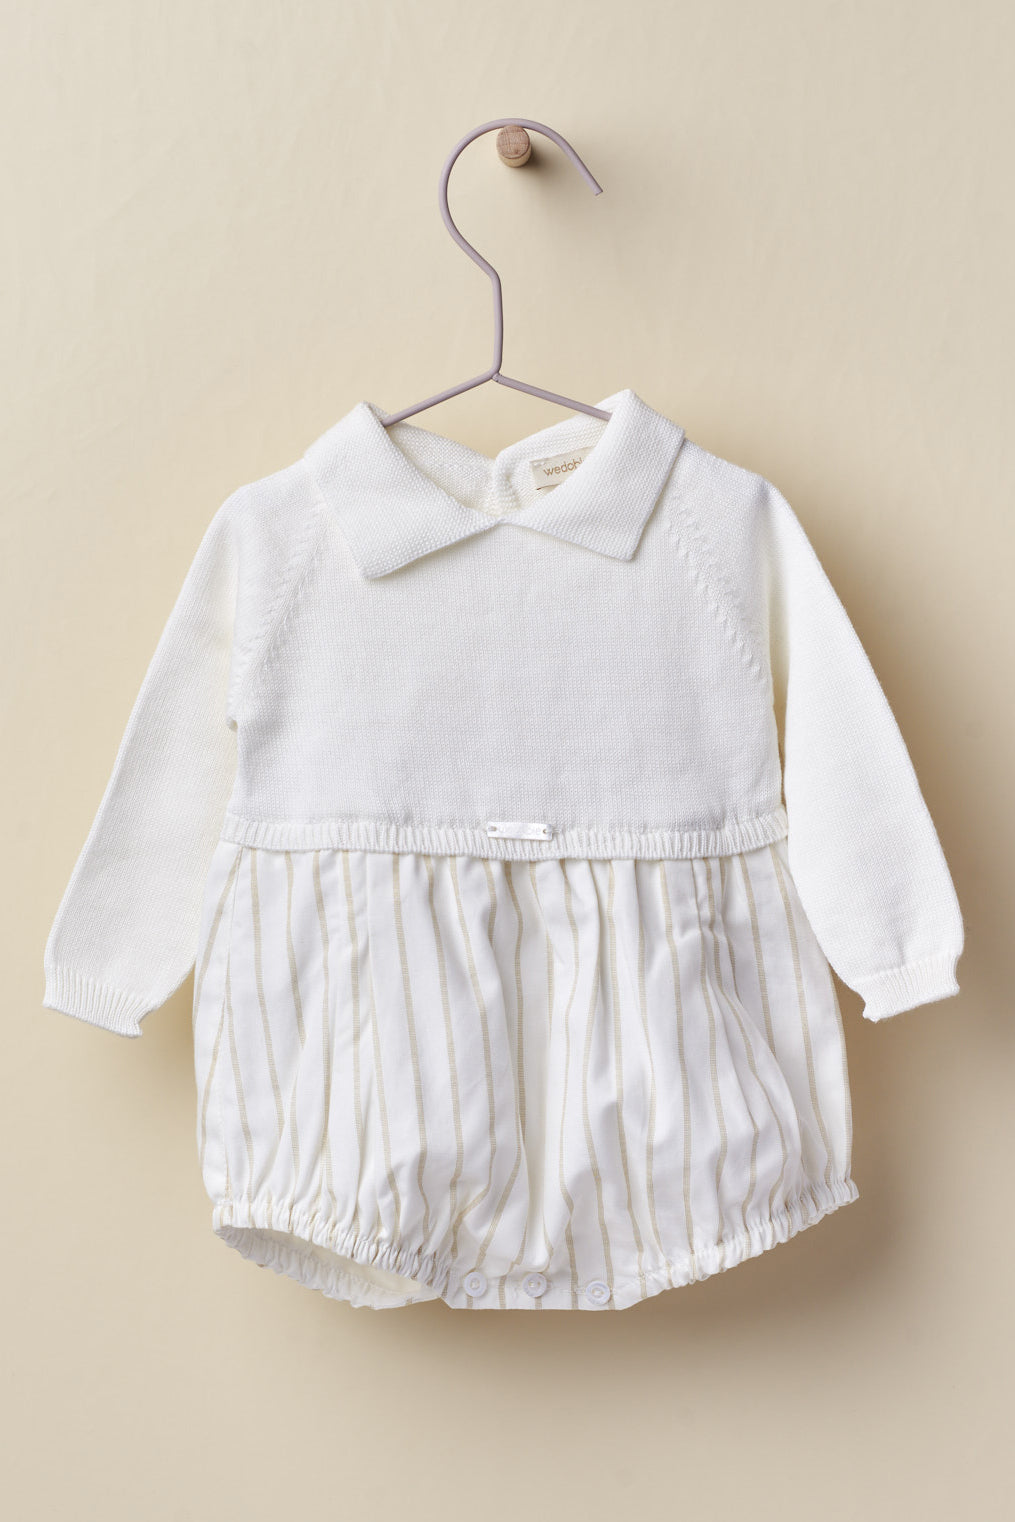 Wedoble "Dexter" White Half Knit Romper | iphoneandroidapplications